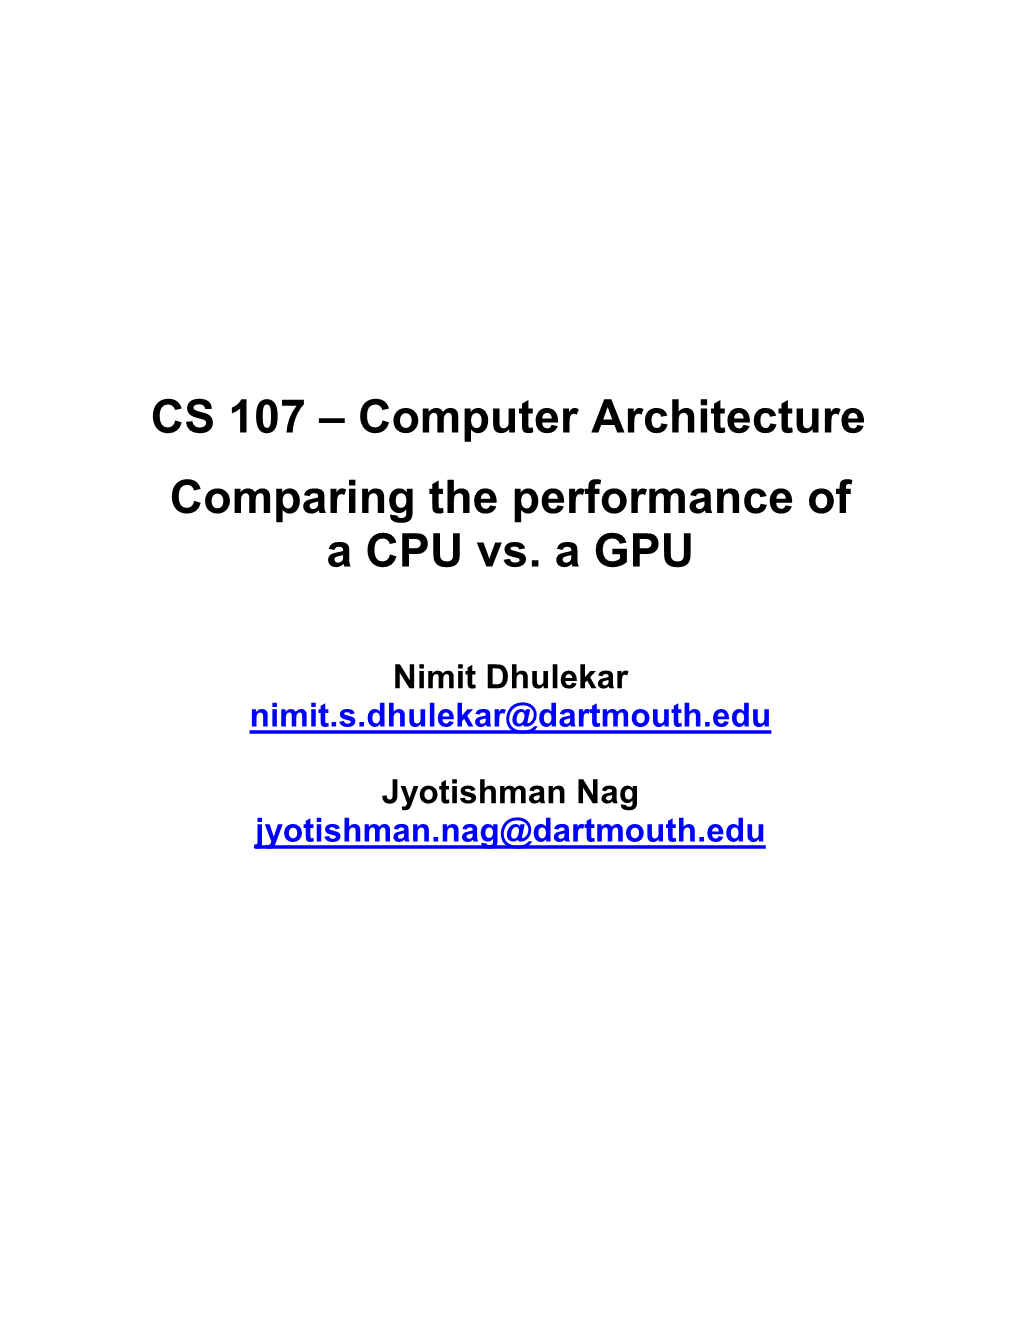 Computer Architecture Comparing the Performance of a CPU Vs. A